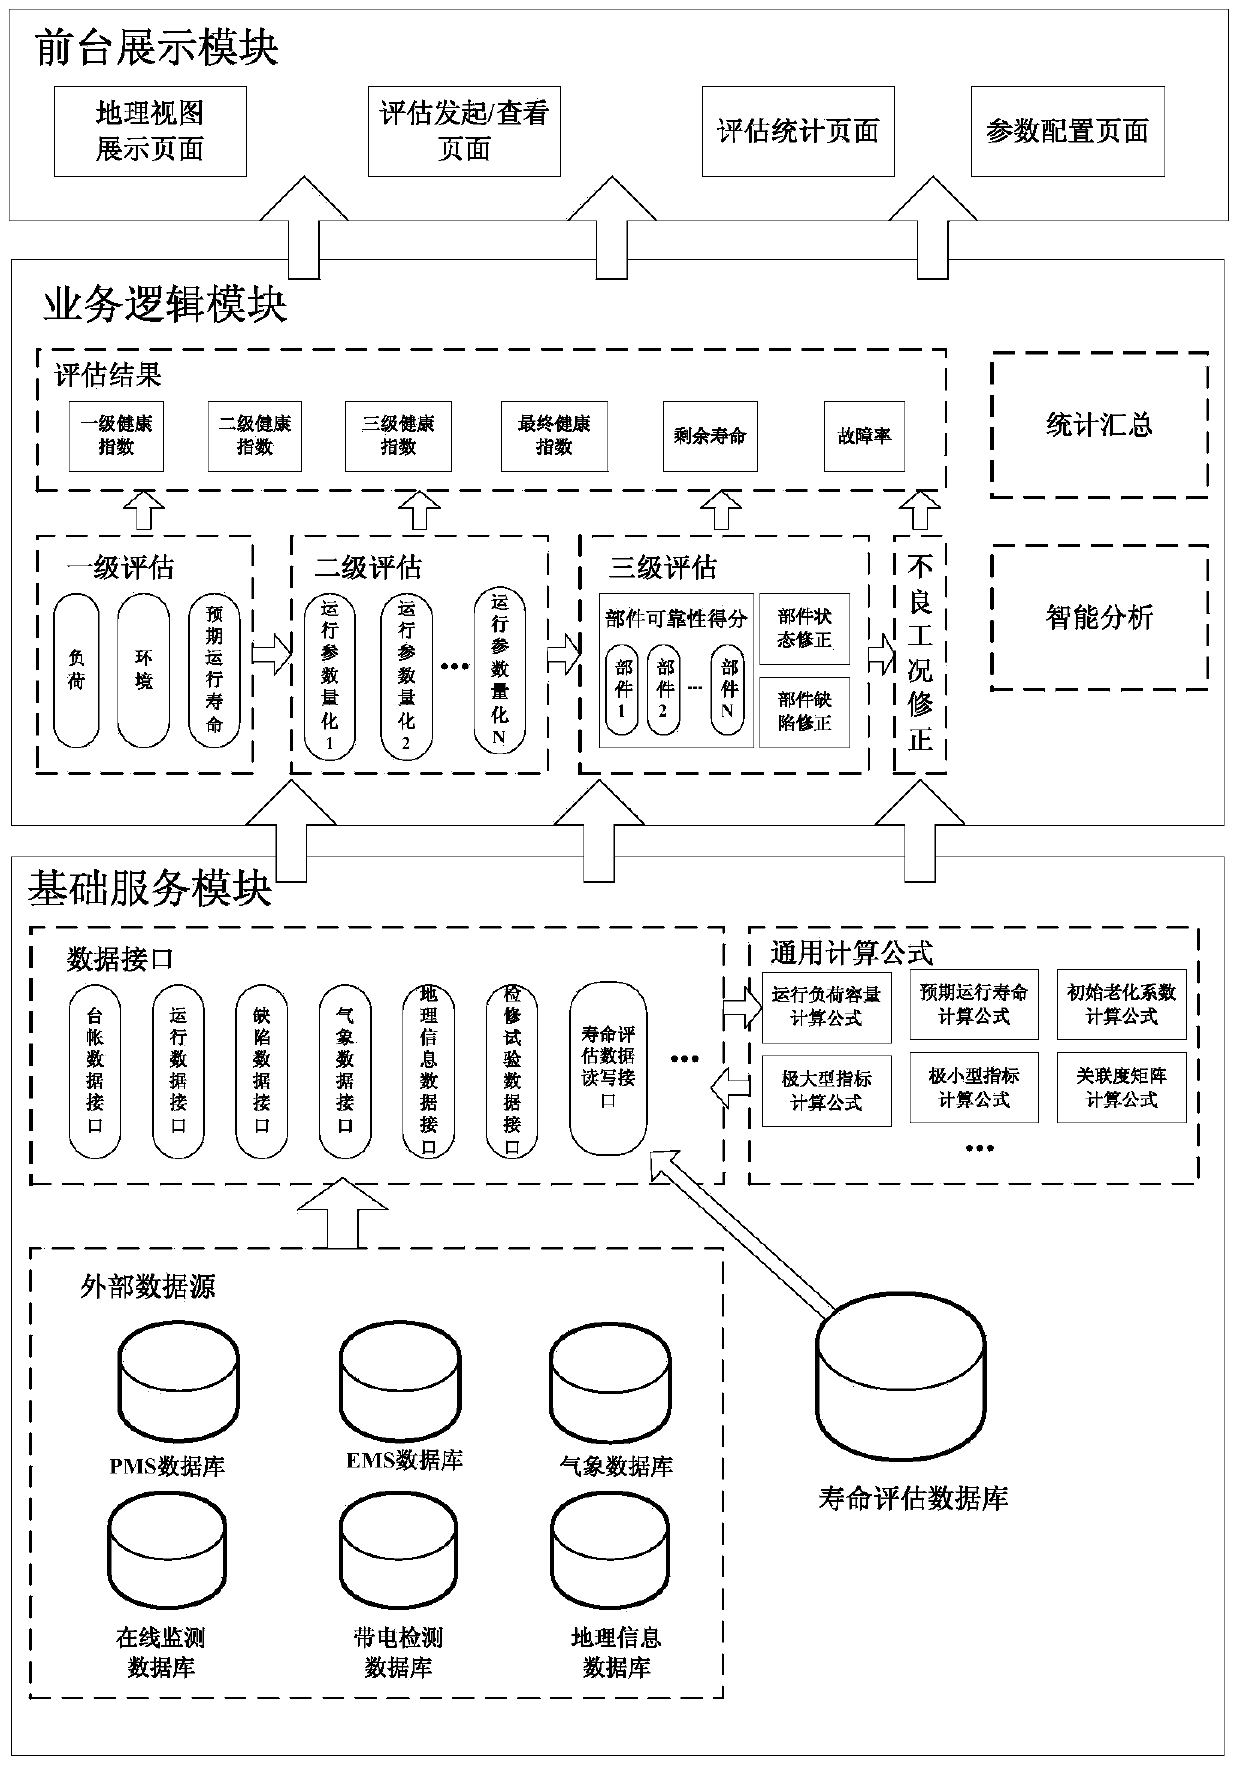 Power grid device service life evaluation platform based on multiple characteristic parameters